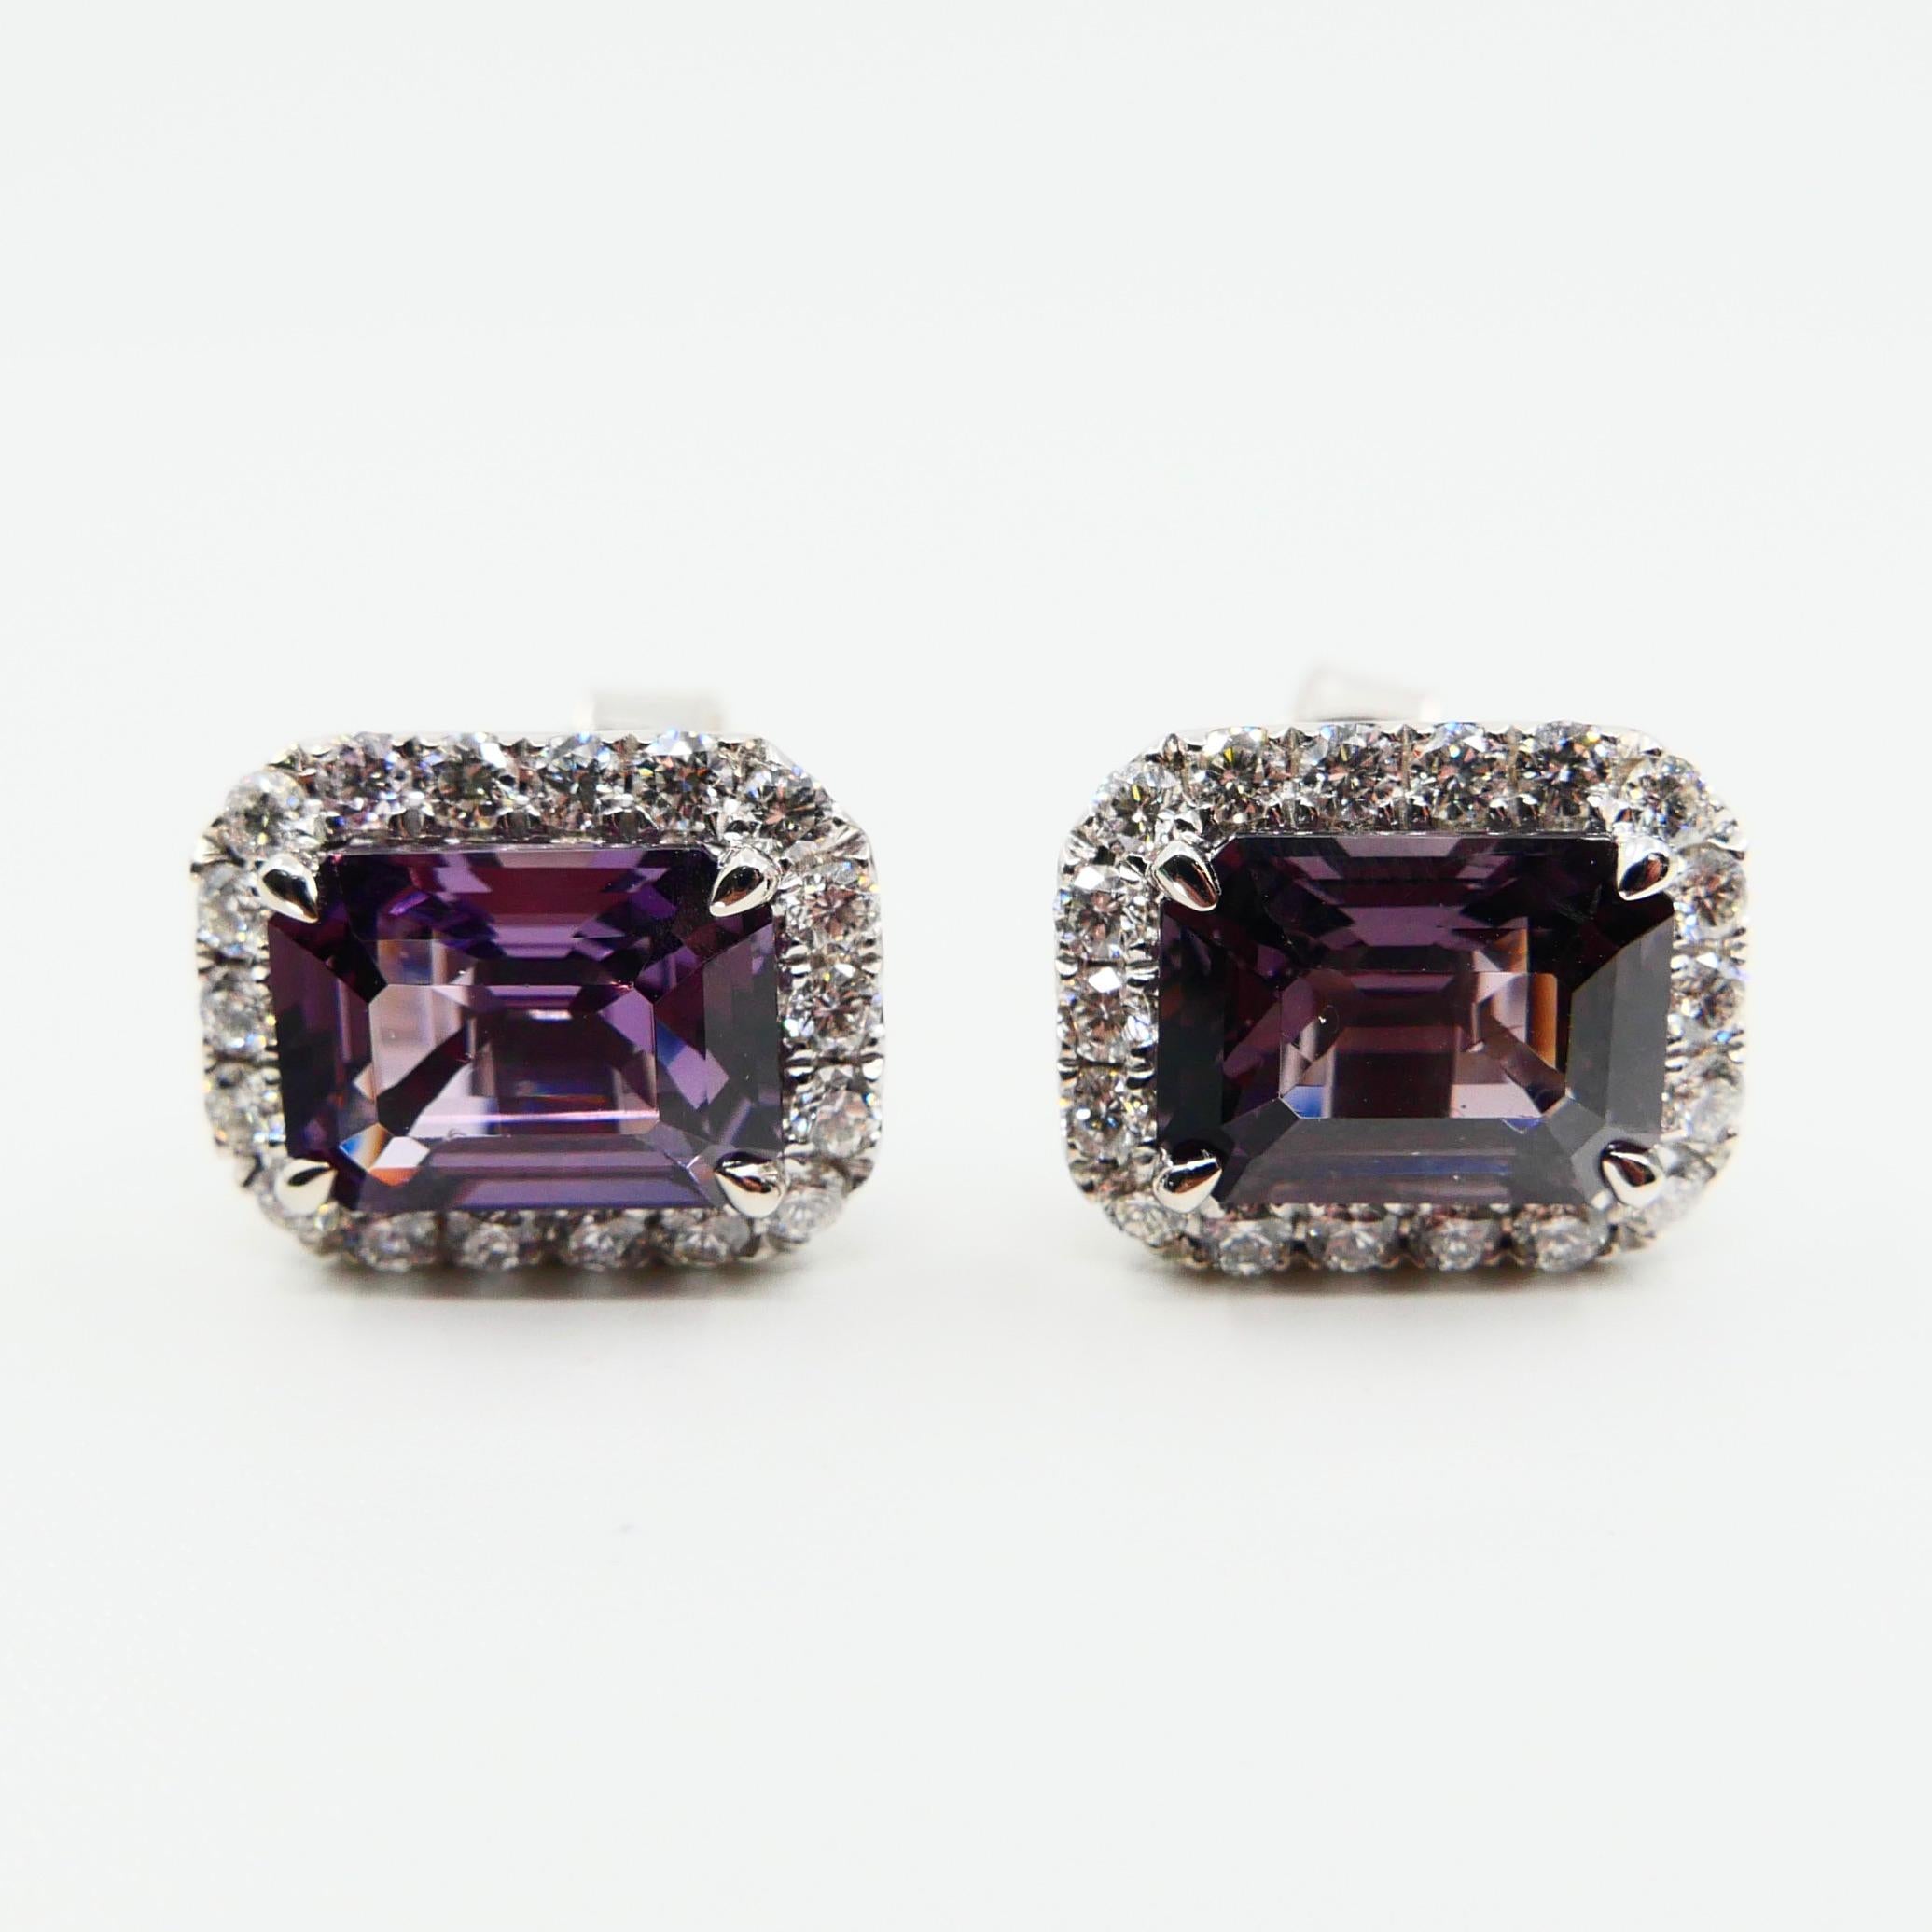 Emerald Cut Natural 4.73 Carat Purple Step Cut Spinels and 0.67 Carat Diamond Earrings For Sale